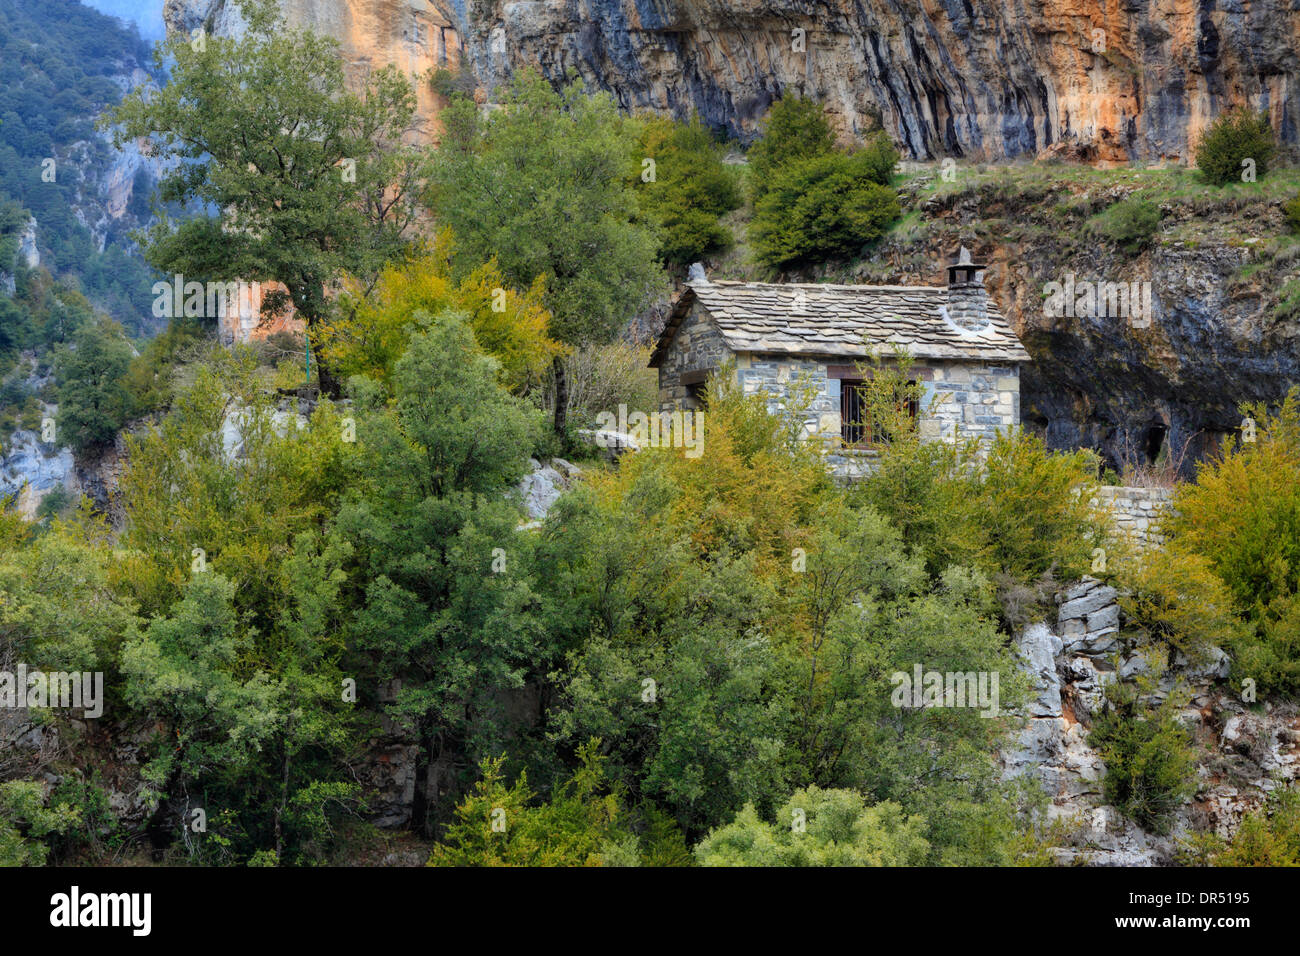 Ranger shack at the trail head of Canon de Anisclo in the Aragon region of Spain Stock Photo